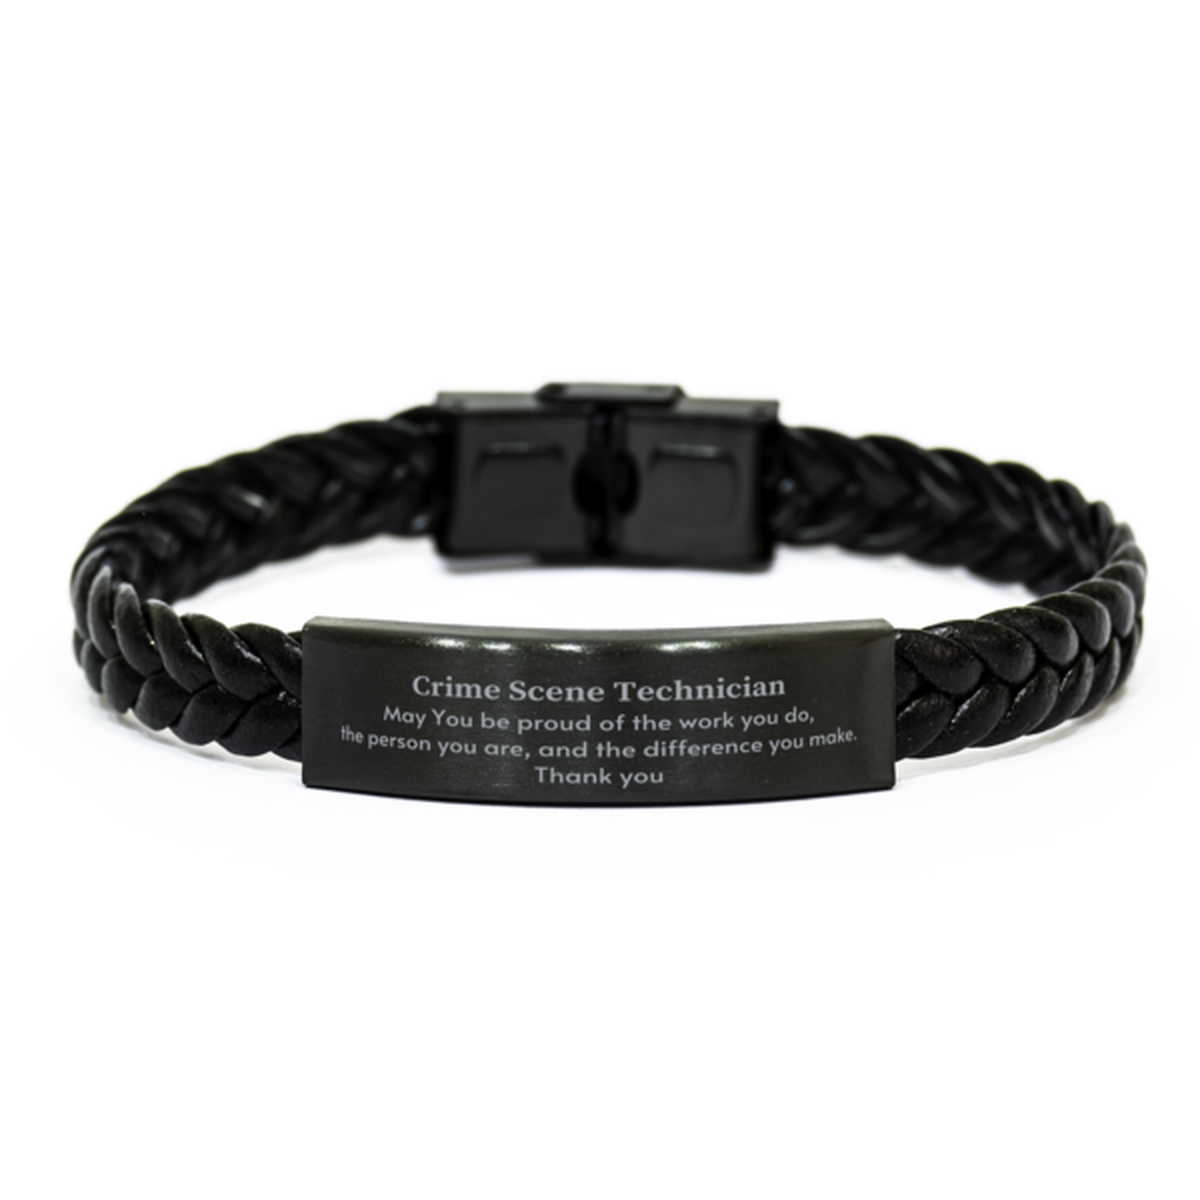 Heartwarming Braided Leather Bracelet Retirement Coworkers Gifts for Crime Scene Technician, Crime Scene Technician May You be proud of the work you do, the person you are Gifts for Boss Men Women Friends